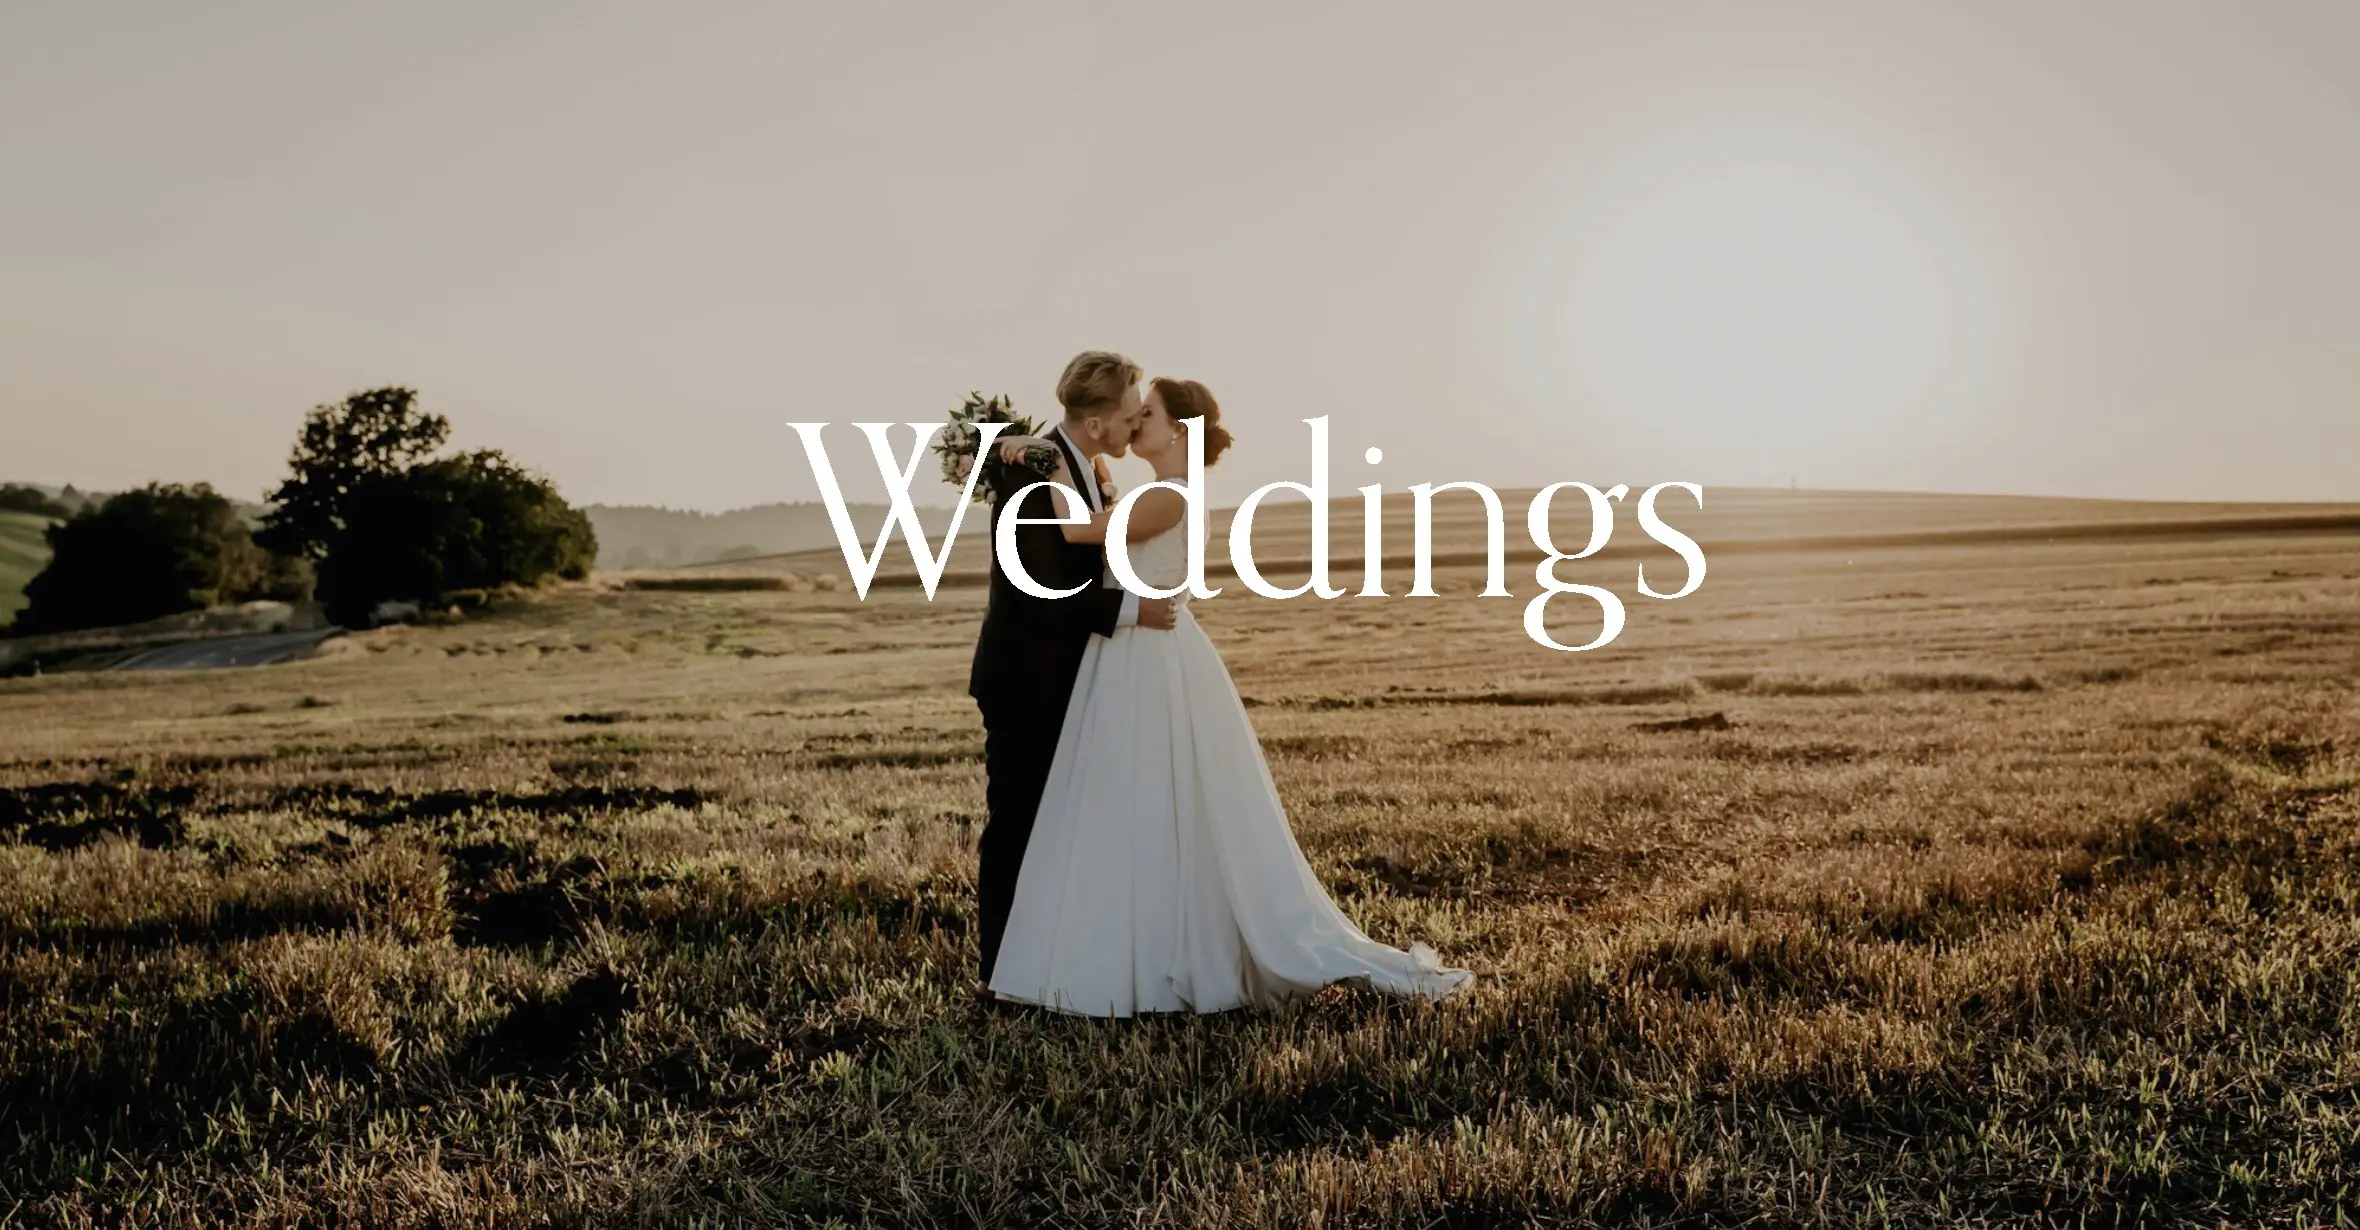 Wedding Photography and Videography